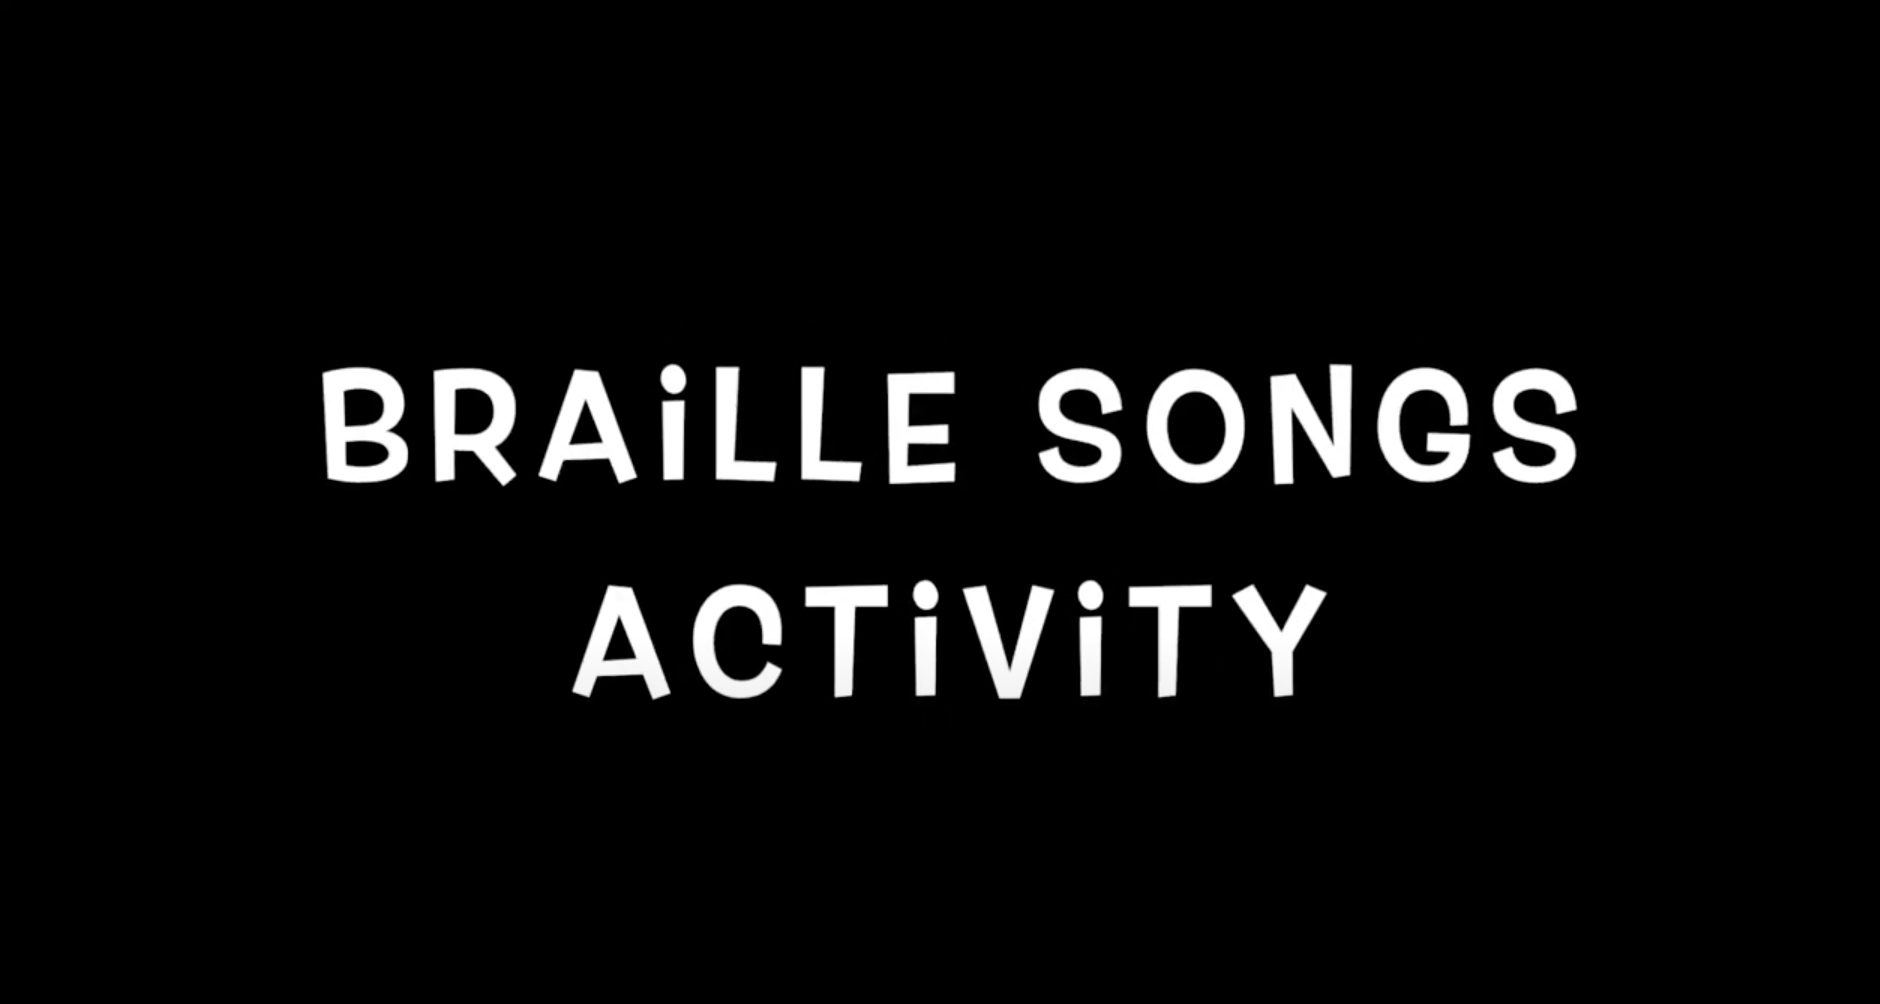 Braille Songs Activity